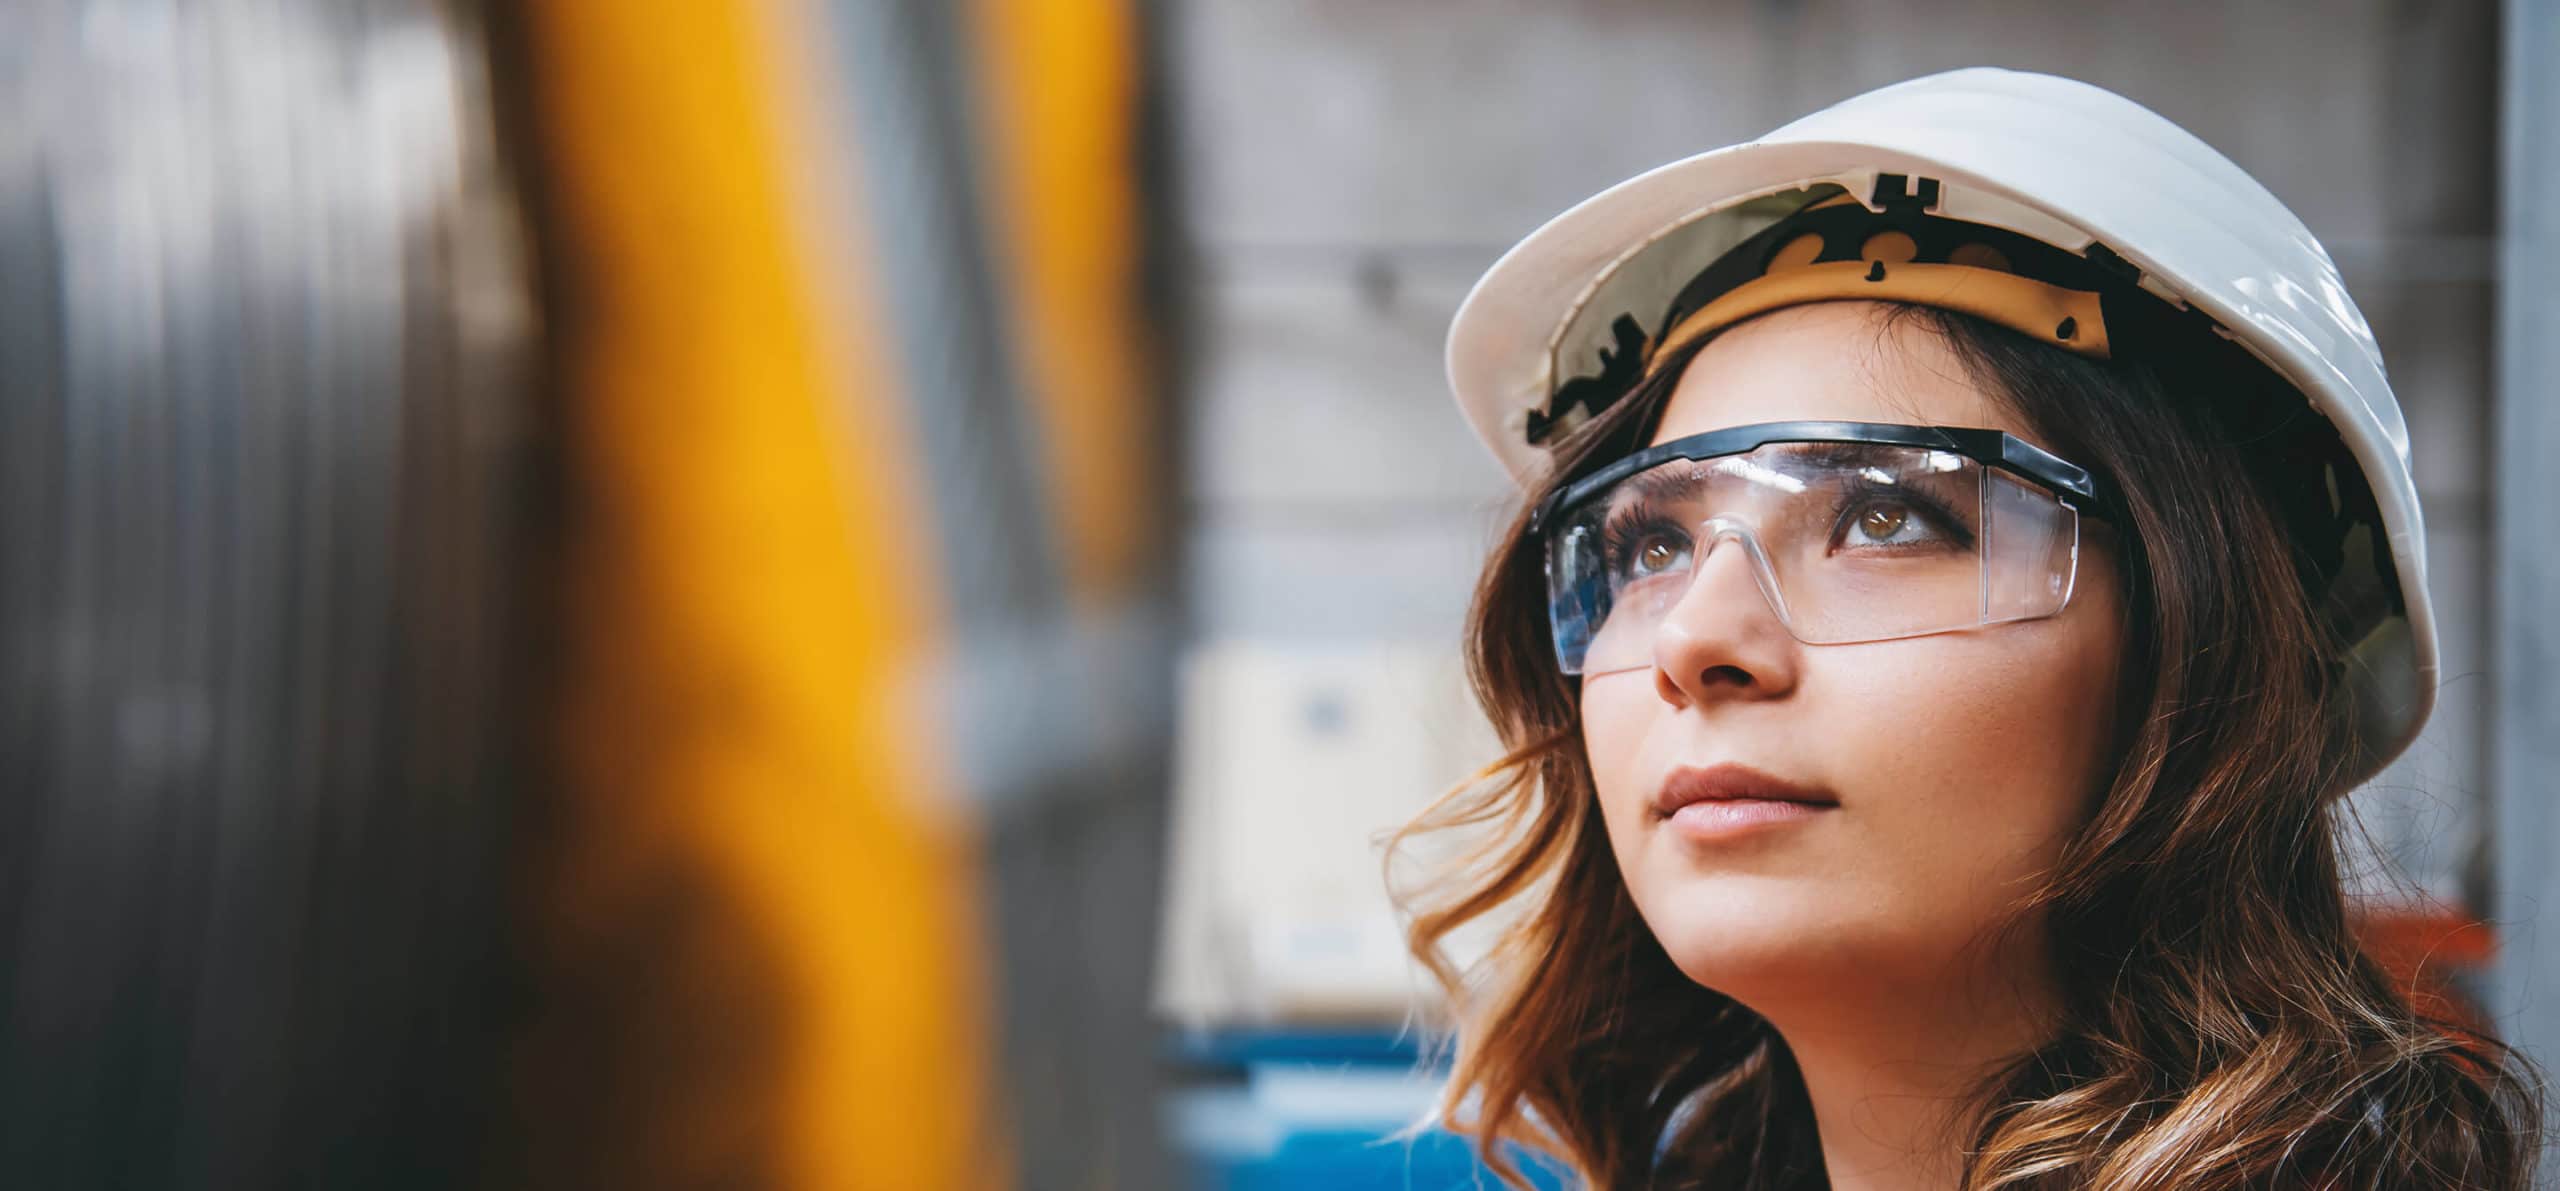 Headshot of worker on a job site looking up. Wearing white hardhat and clear goggles.